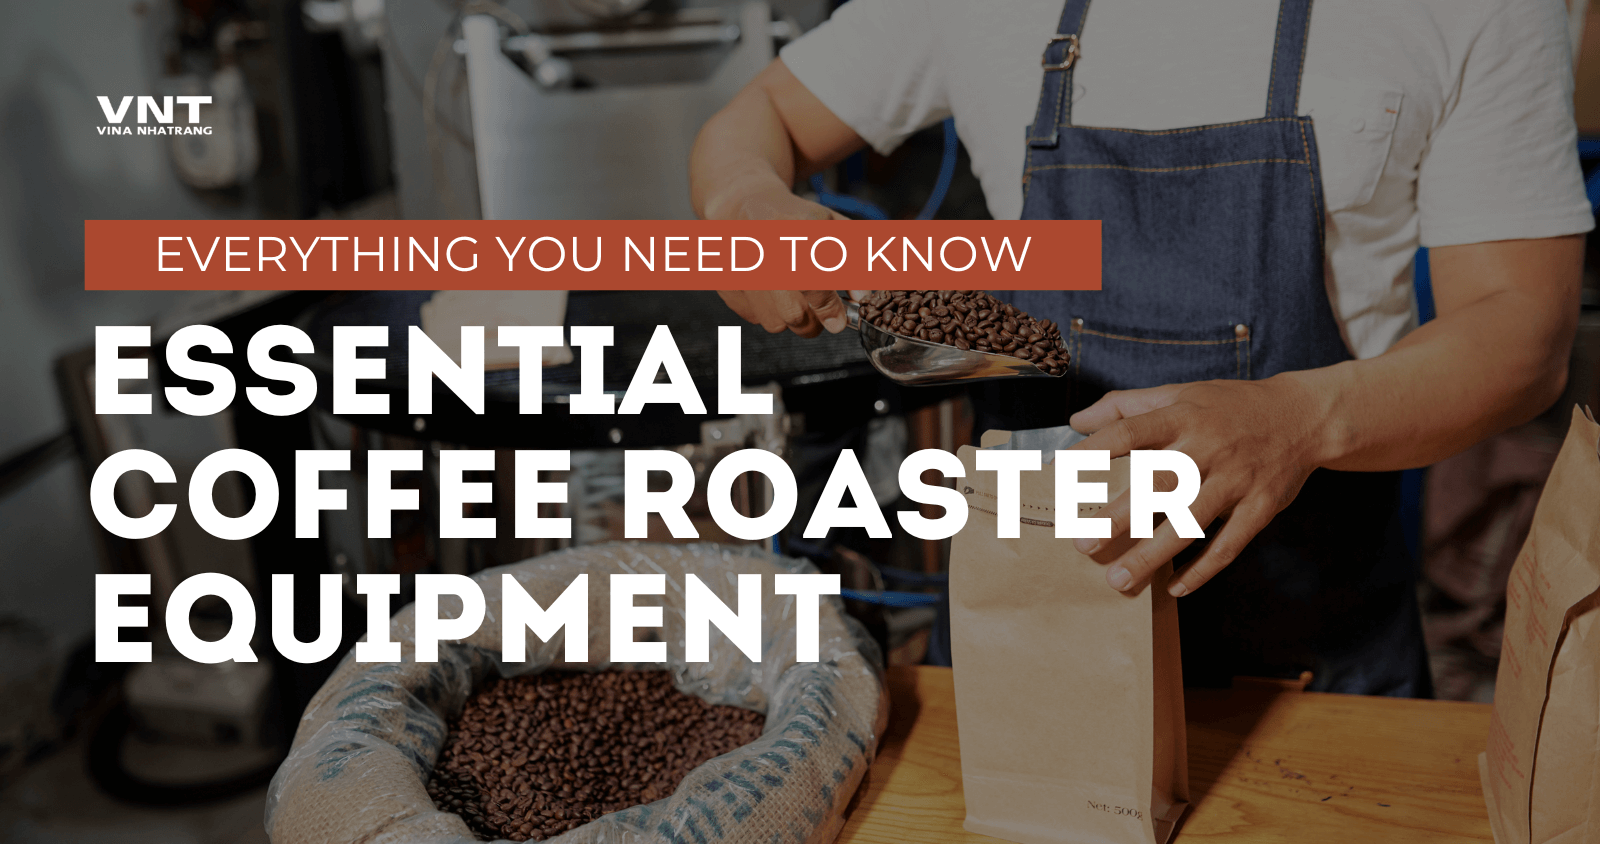 What Equipment is Needed to Roast Coffee?